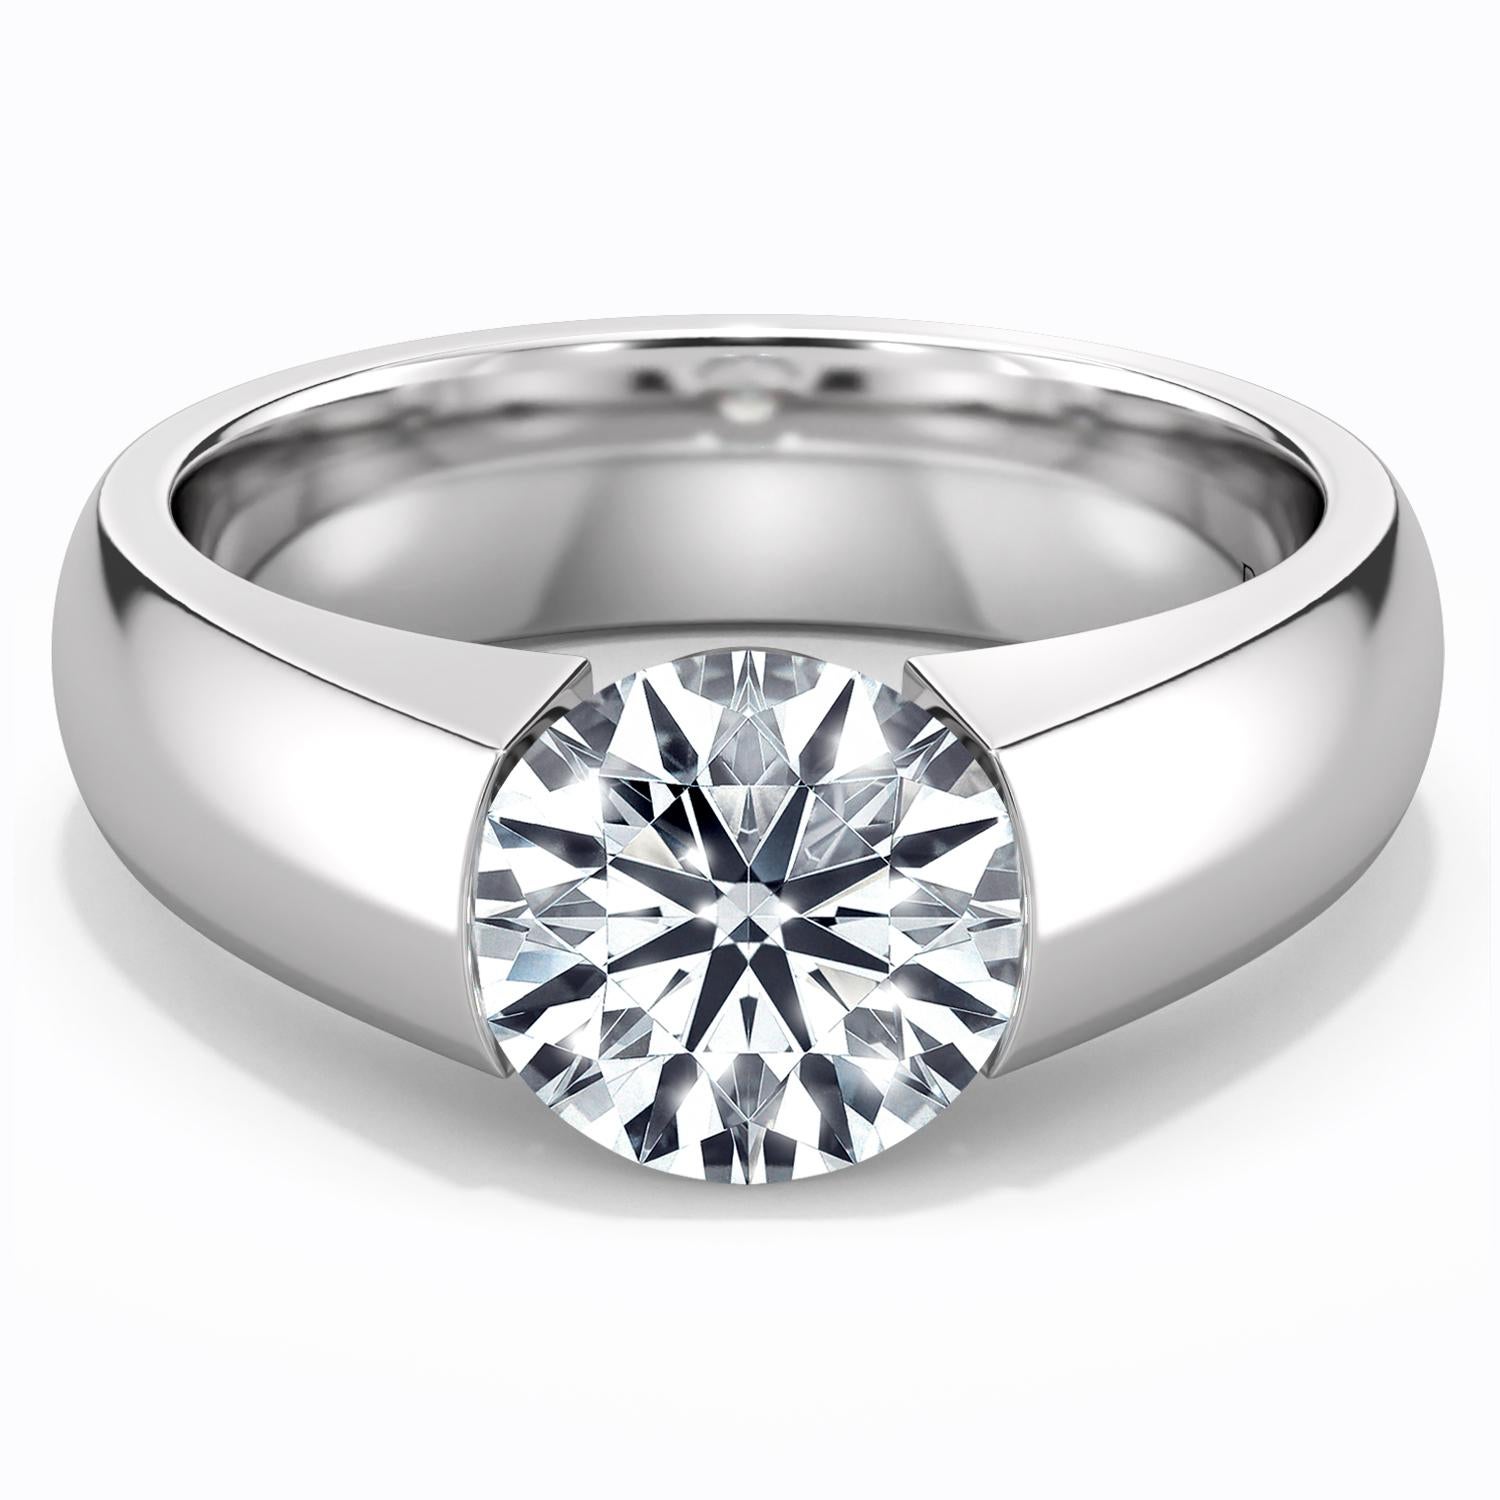 For Sale:  Norem de Danhov tension style engagement ring in 14k White Gold with Moissanite  3